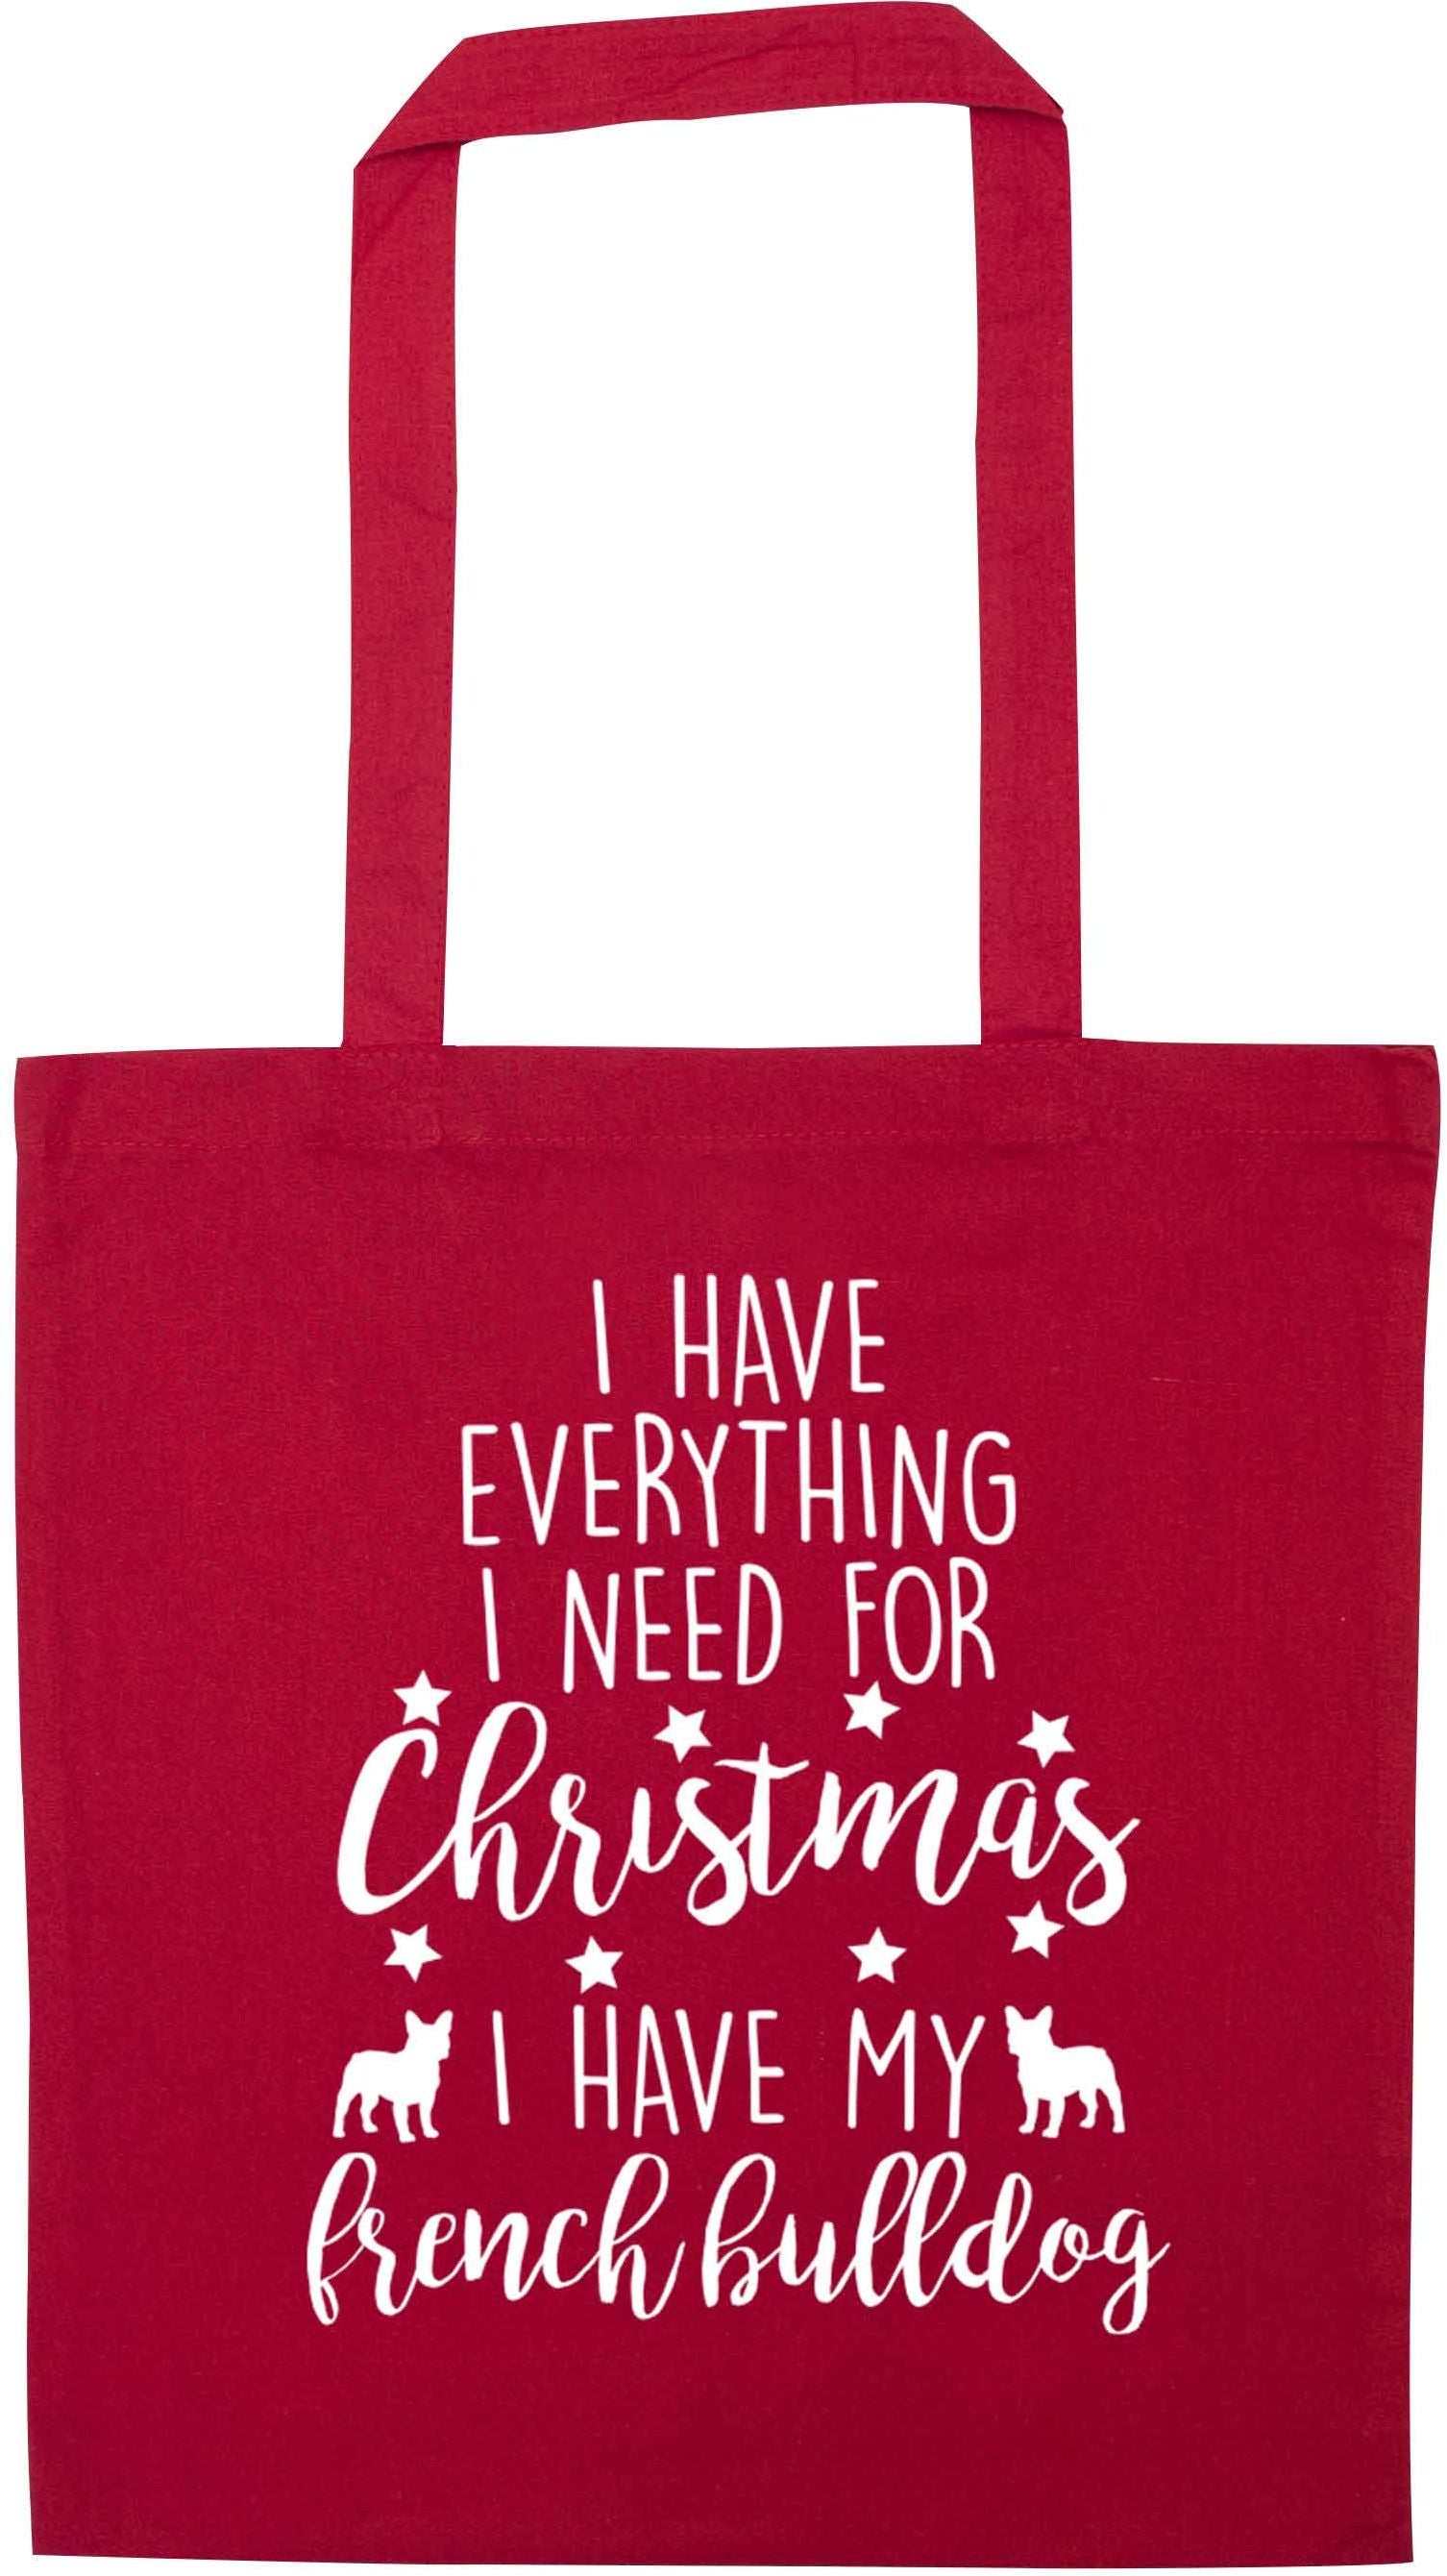 I have everything I need for Christmas I have my french bulldog red tote bag